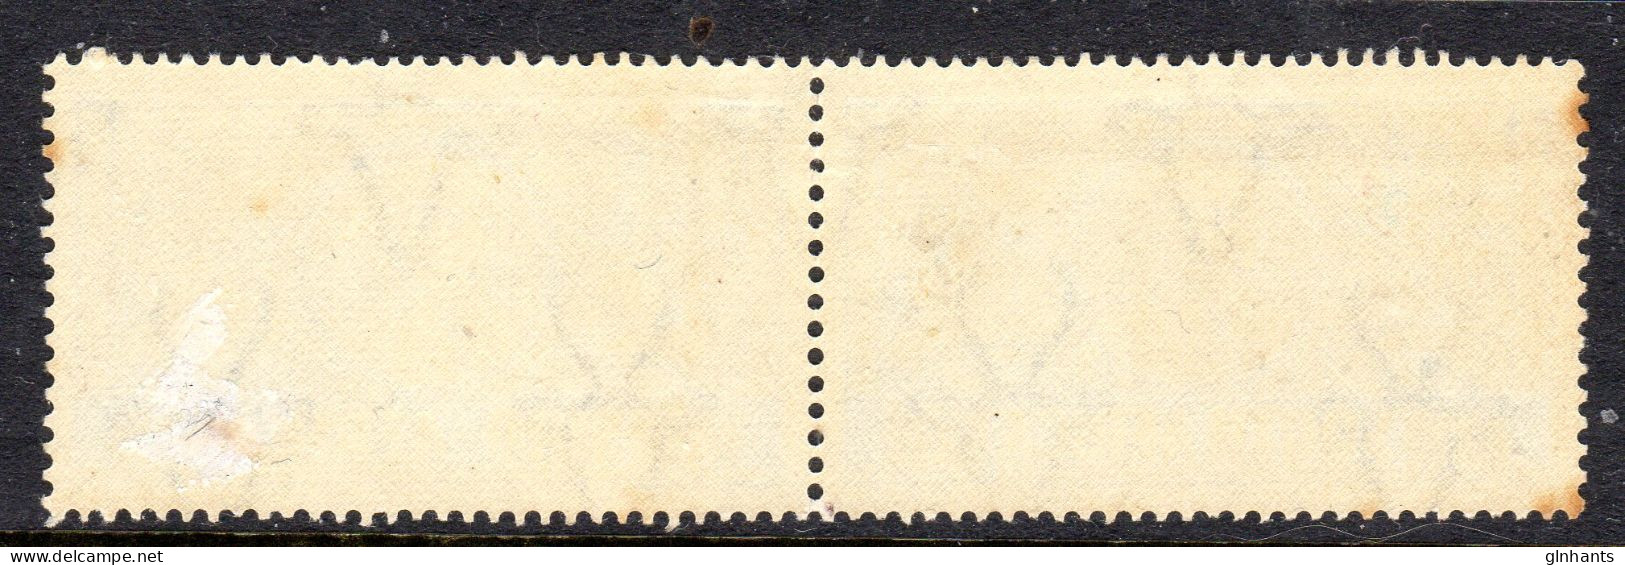 SOUTH AFRICA - 1941 WOMENS AUXILIARY SERVICES 3d PAIR MNH ** SG 91 GUM FAULTS (2 SCANS) - Ungebraucht